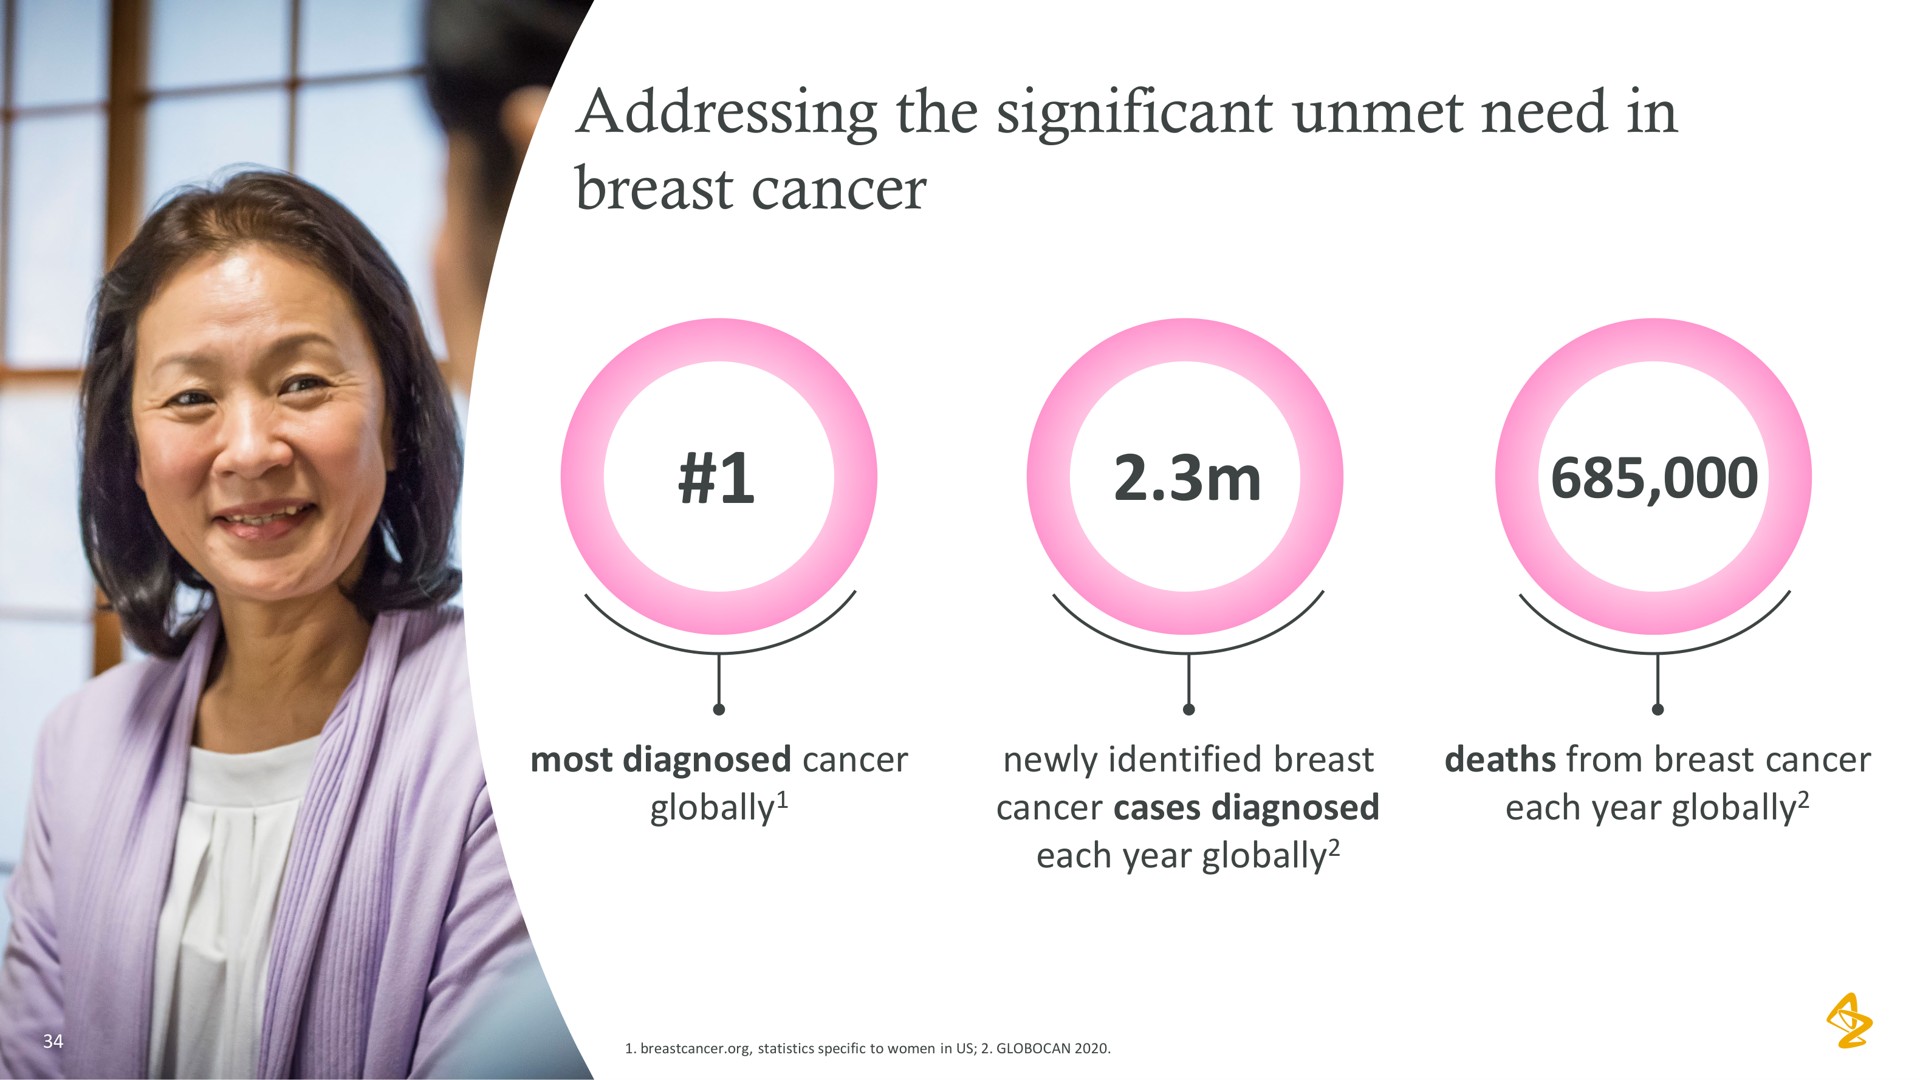 addressing the significant unmet need in breast cancer | AstraZeneca